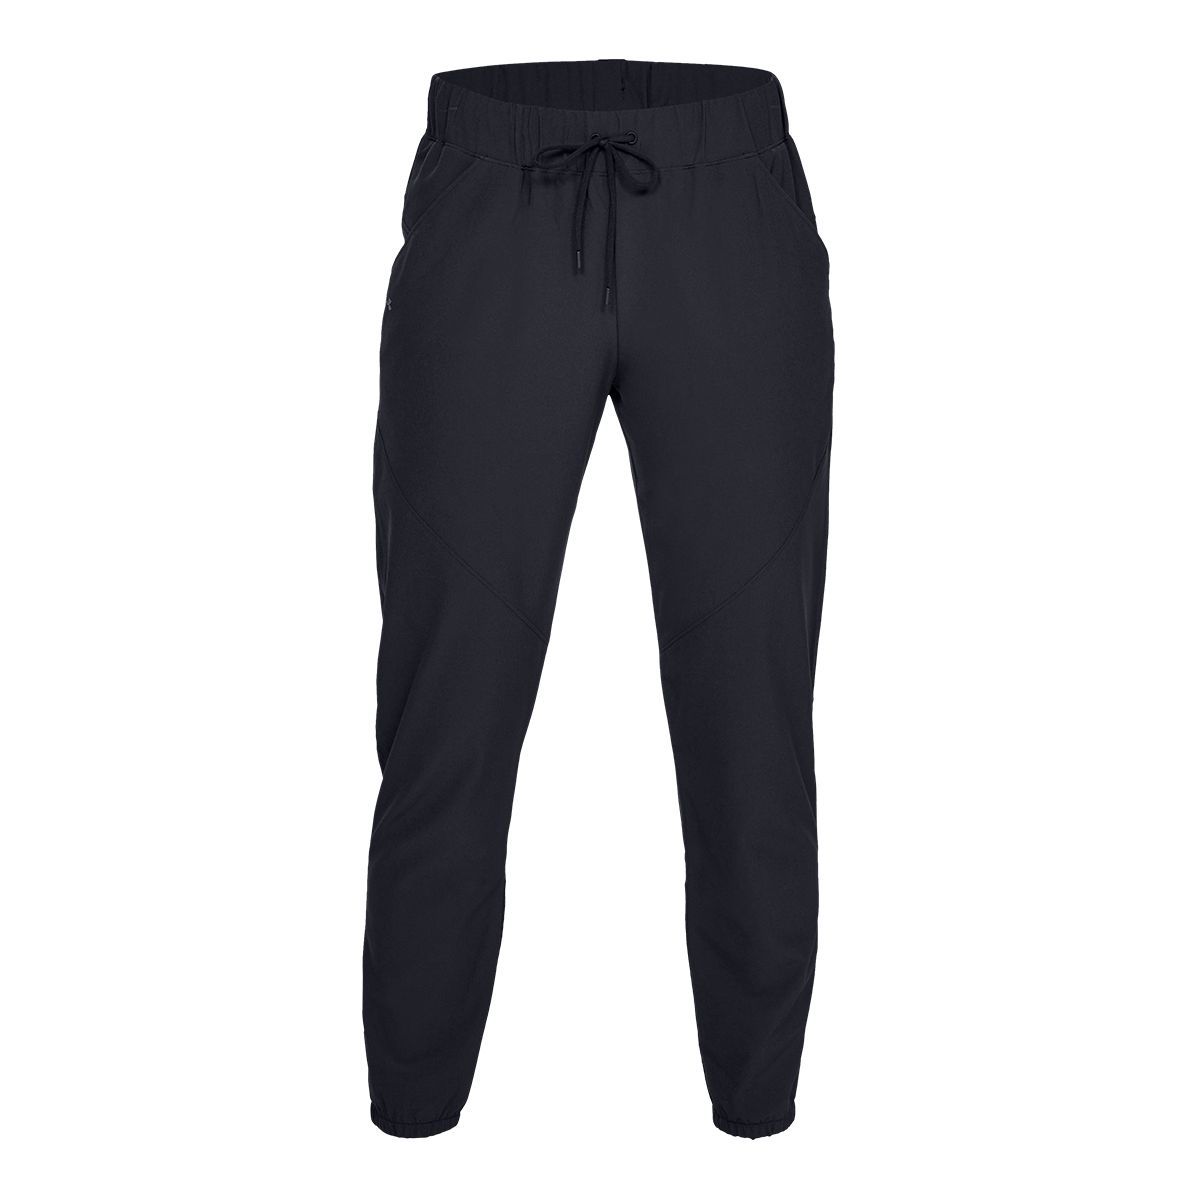 Under Armour Women's Fusion Pants, Hiking, Outdoor, Loose Fit